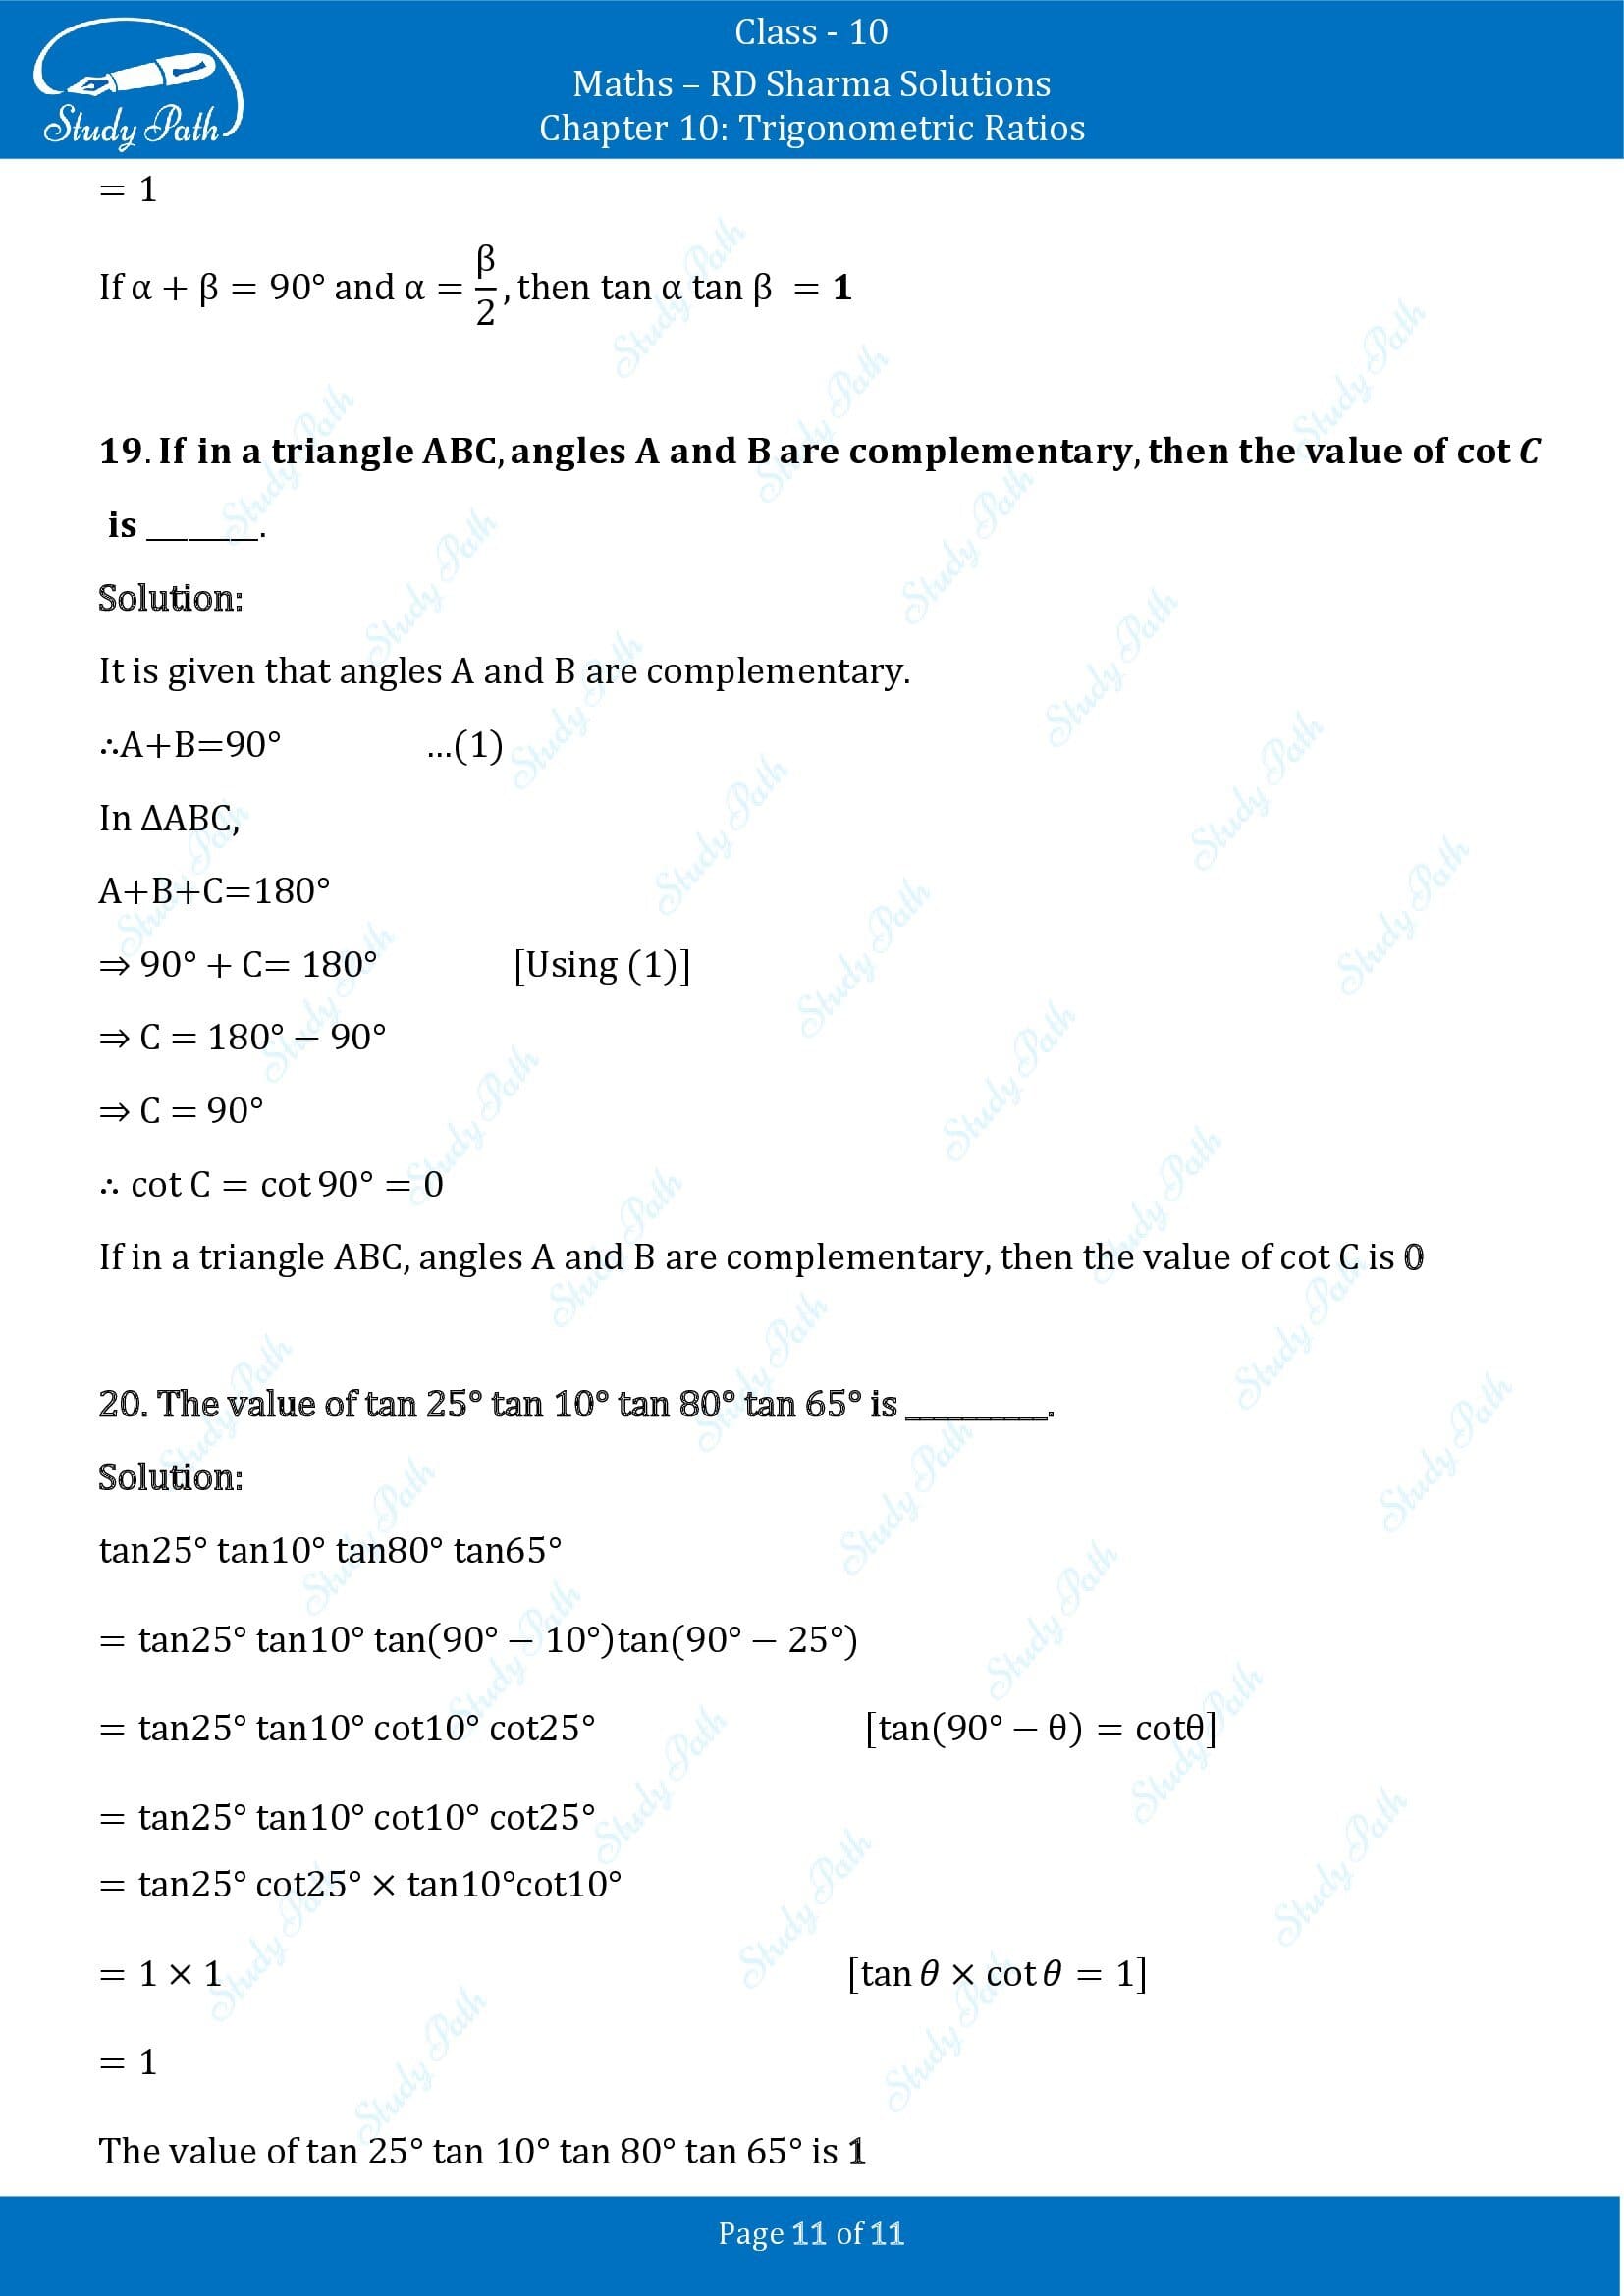 RD Sharma Solutions Class 10 Chapter 10 Trigonometric Ratios Fill in the Blank Type Questions FBQs 00011